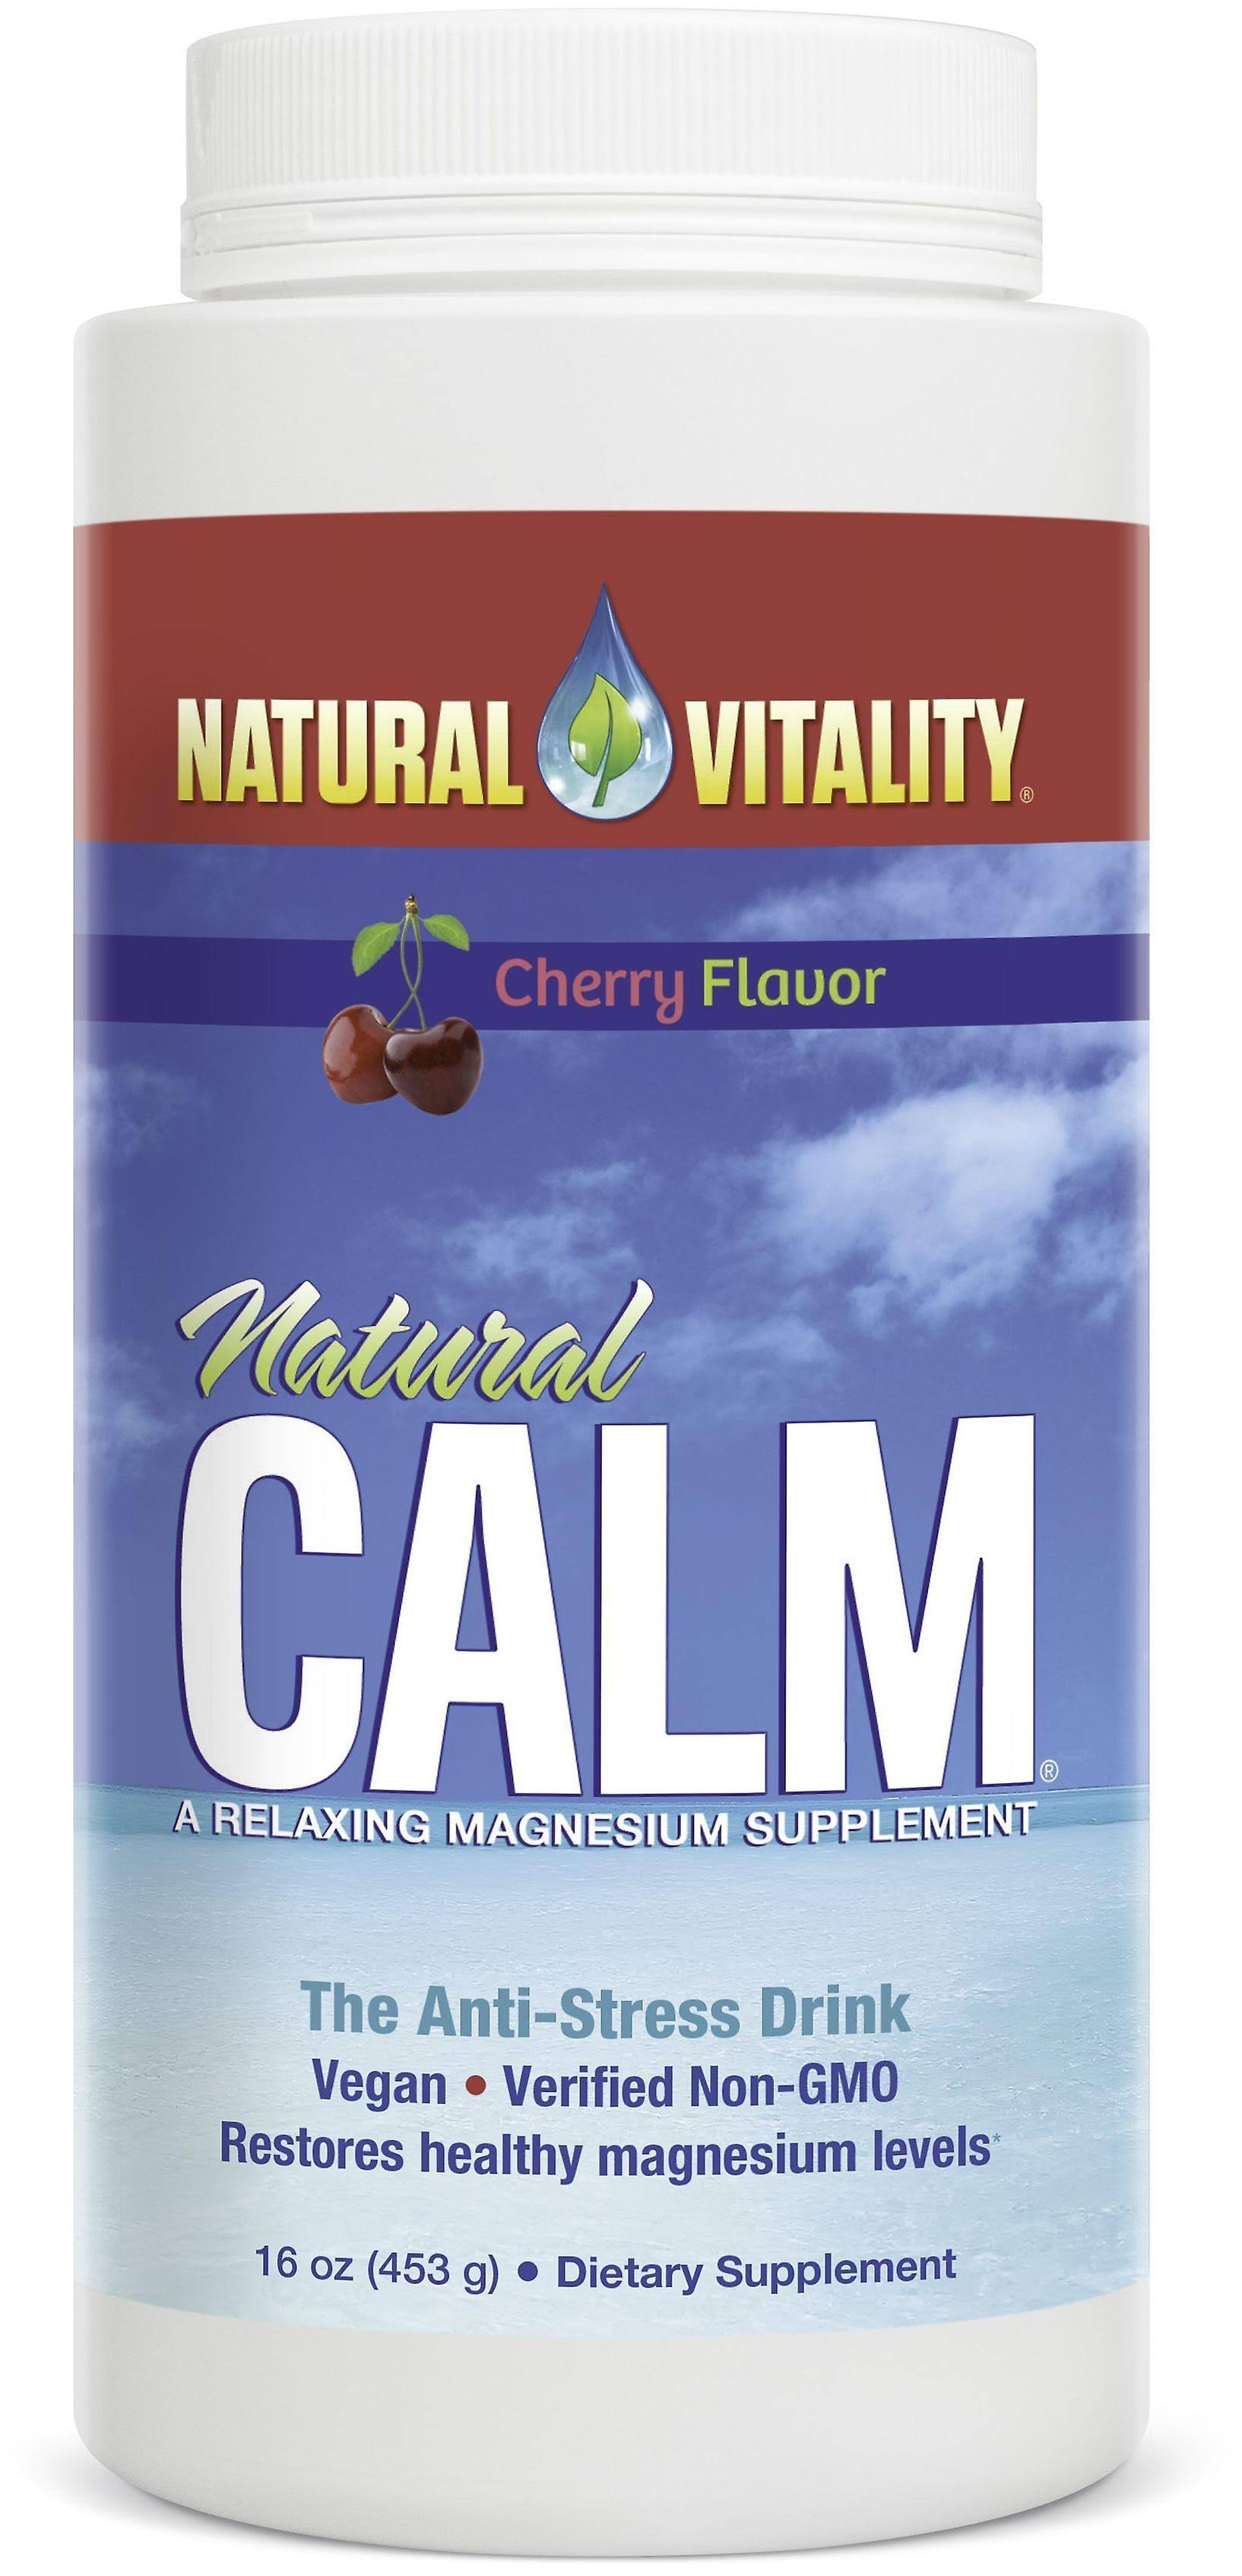 Natural Vitality Natural Calm Magnesium Dietary Supplement - Cherry Flavor, 16oz